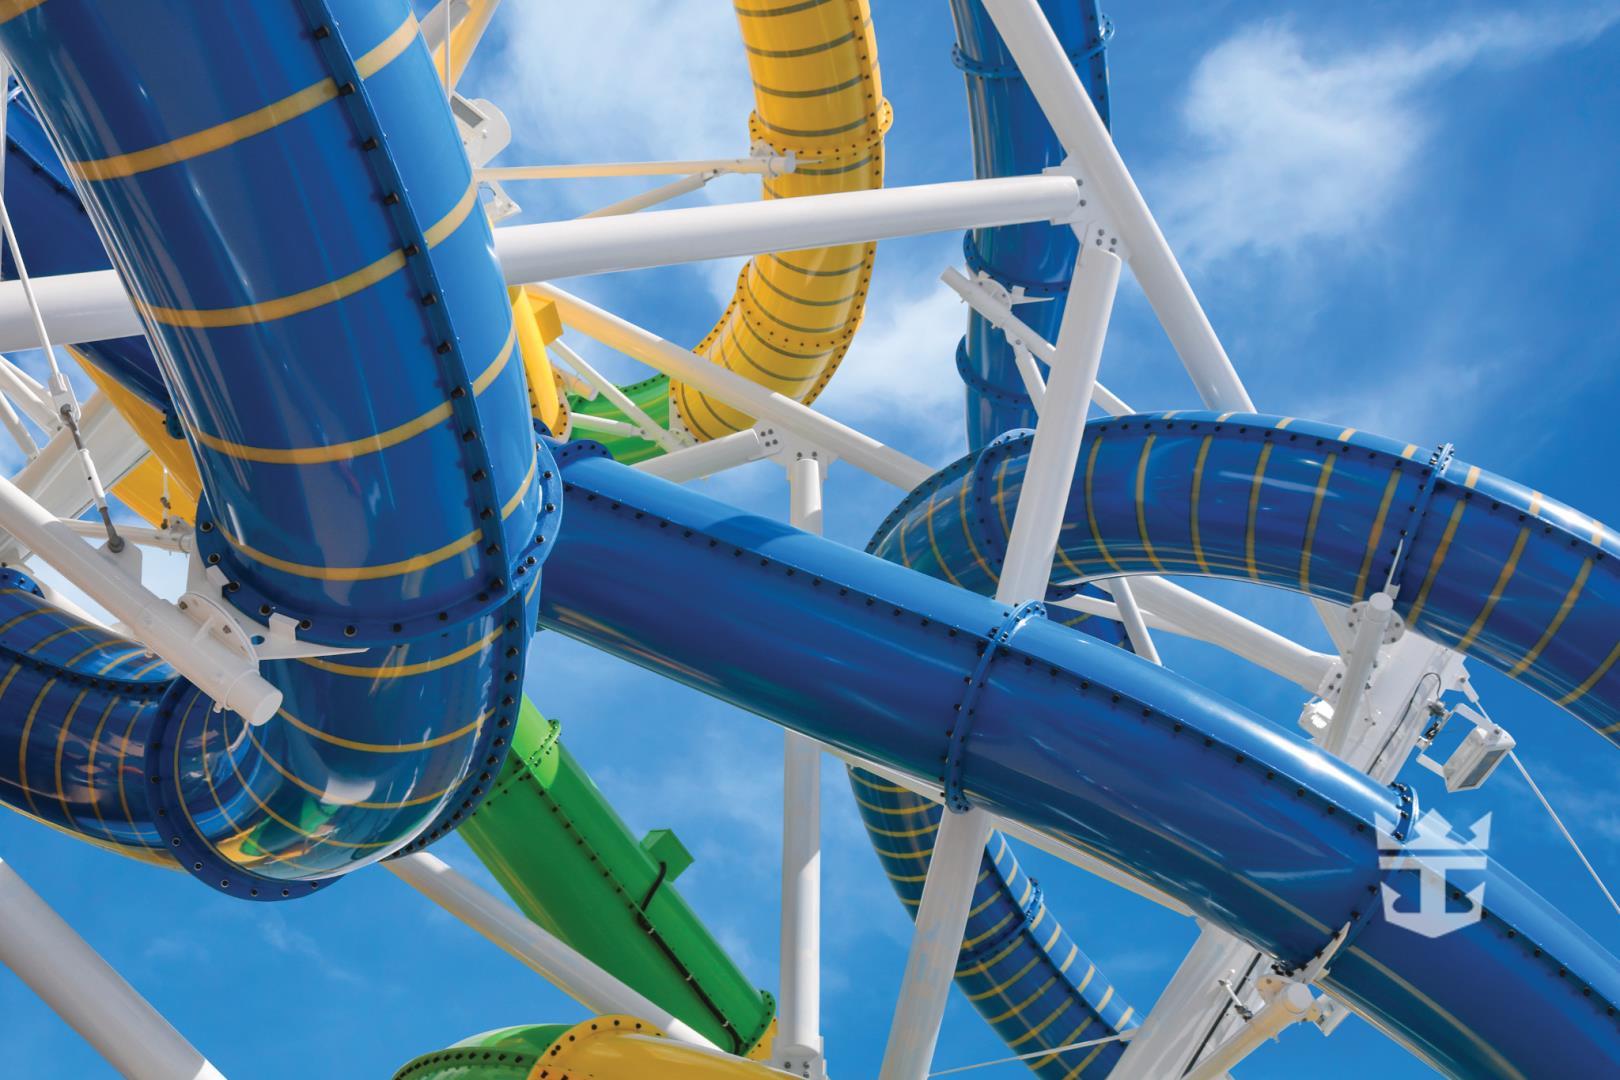 View from below of Perfect Storm waterslide